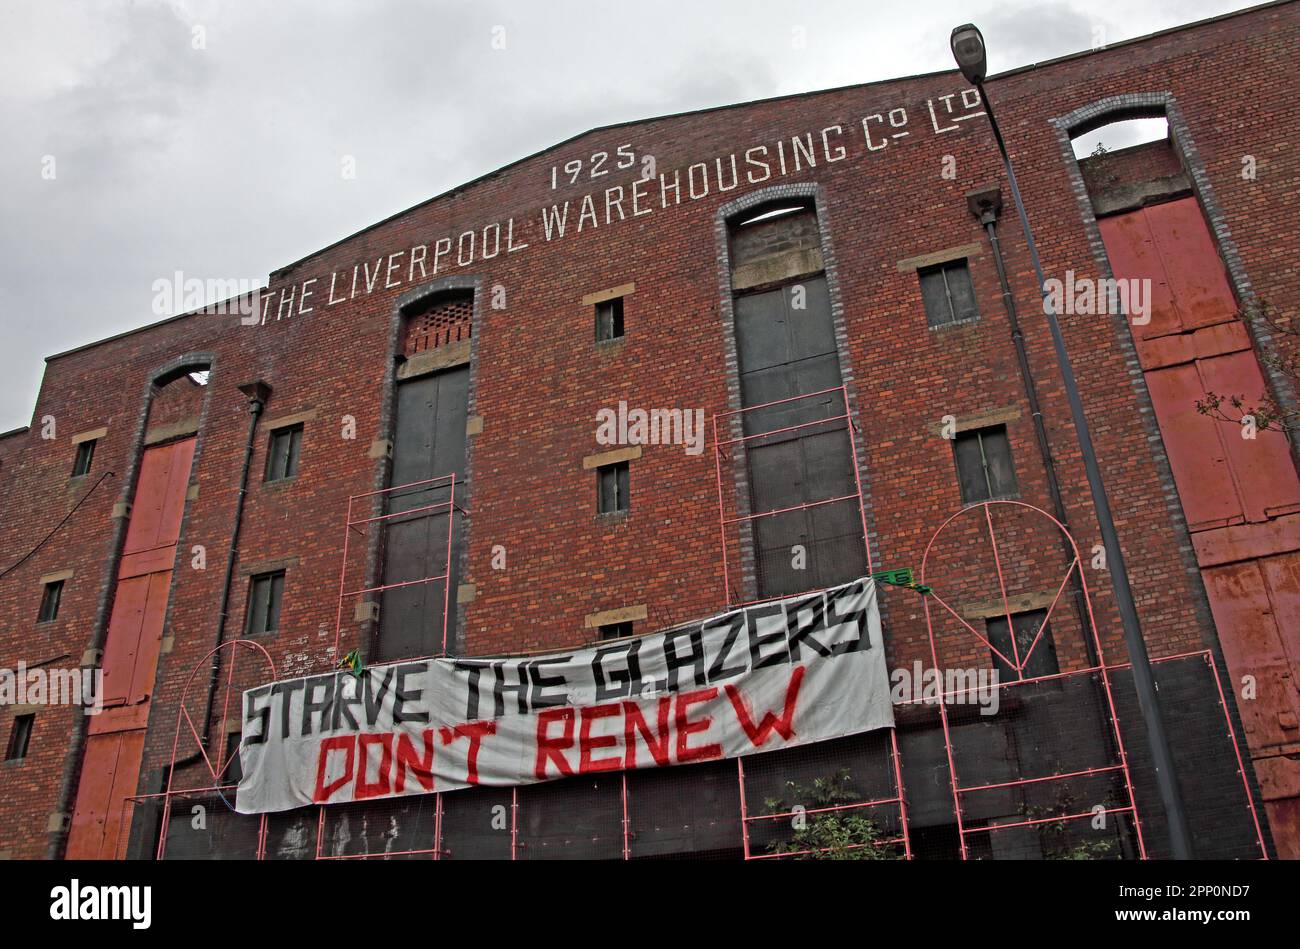 Starve The Glazers, Don't Renew graffiti sign, in Trafford Park, MUFC, Manchester United sale, fan opinion, Manchester, England, UK Stock Photo